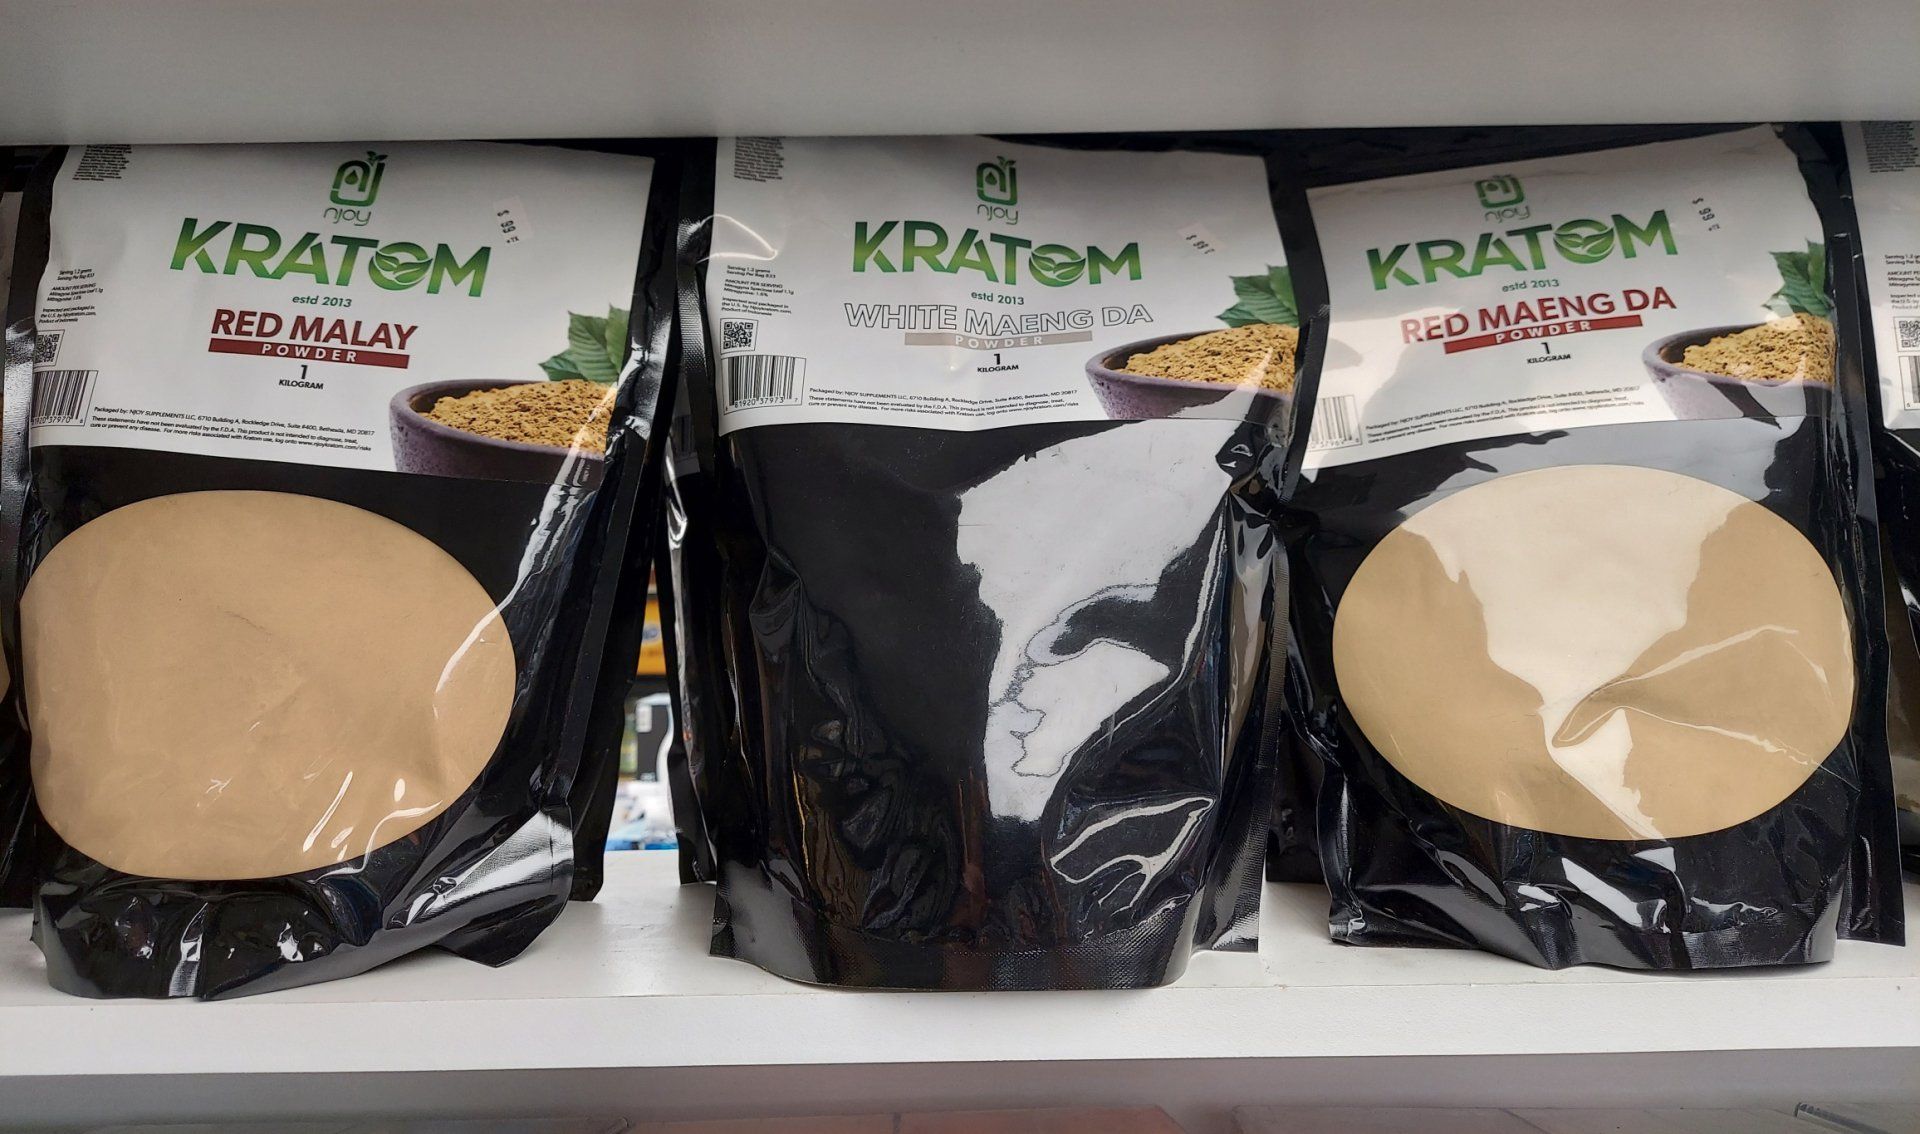 Kratom products and supplies